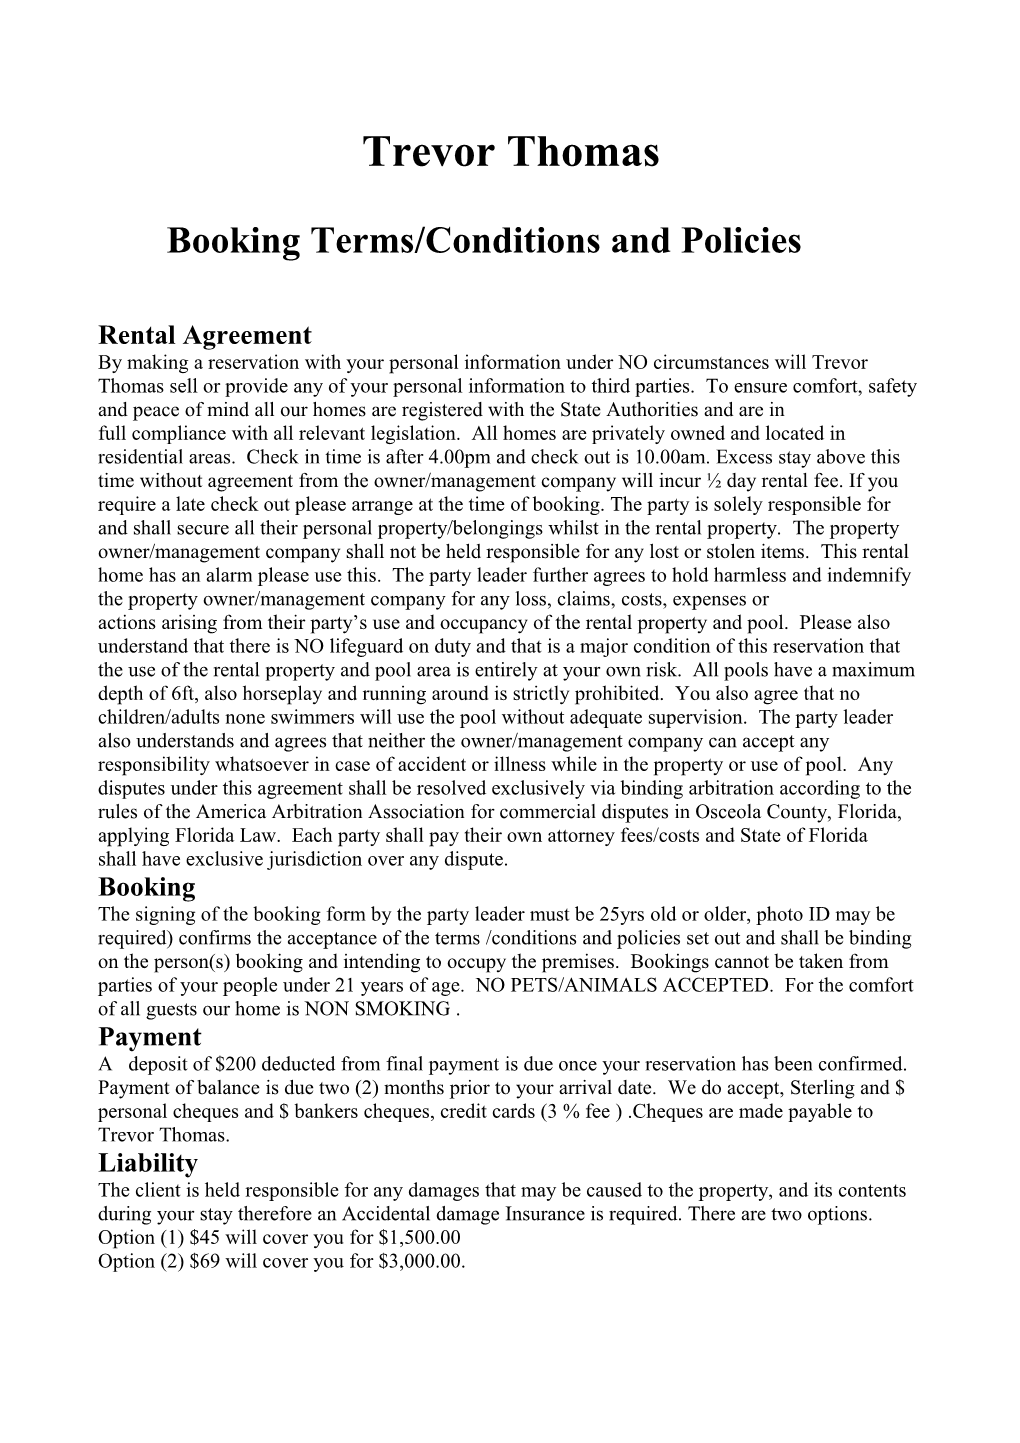 Booking Terms/Conditions and Policies